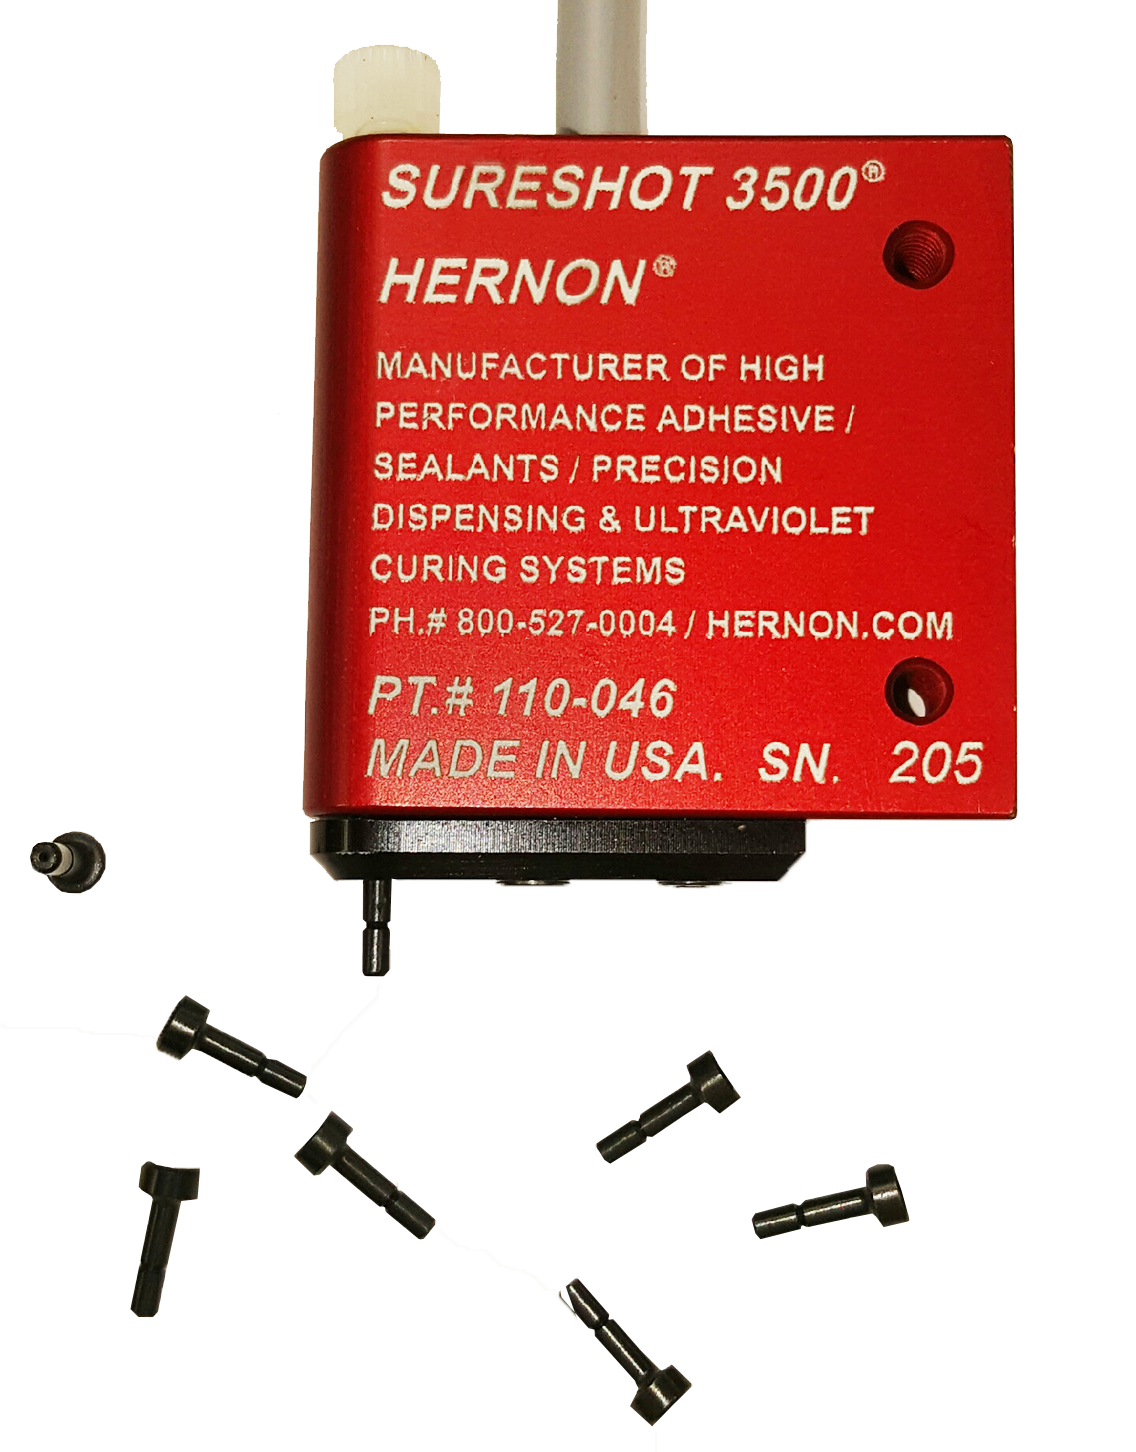 Click here to see a high resolution image of the redesigned Sureshot 3500